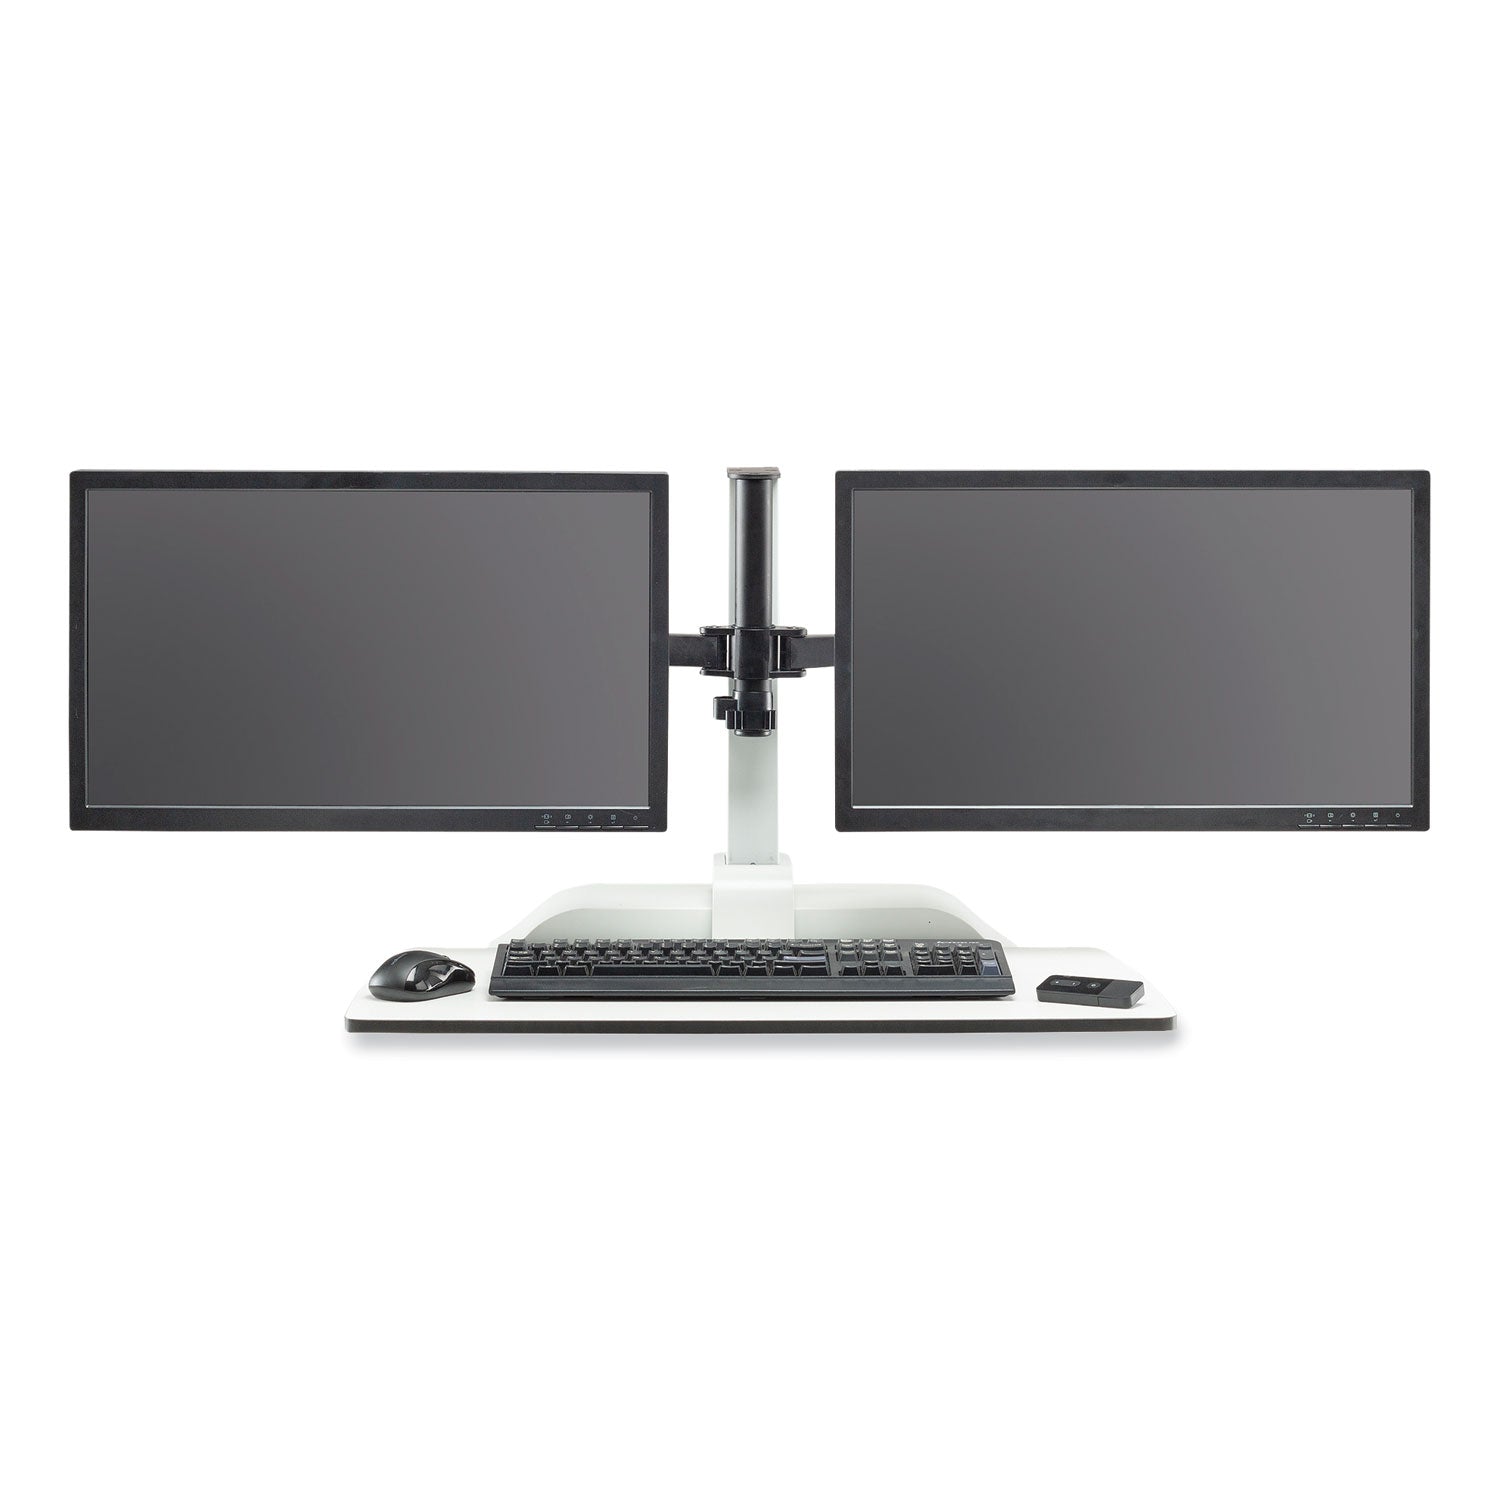 soar-electric-desktop-sit-stand-dual-monitor-arm-for-27-monitors-white-supports-10-lbs-ships-in-1-3-business-days_saf2193wh - 6